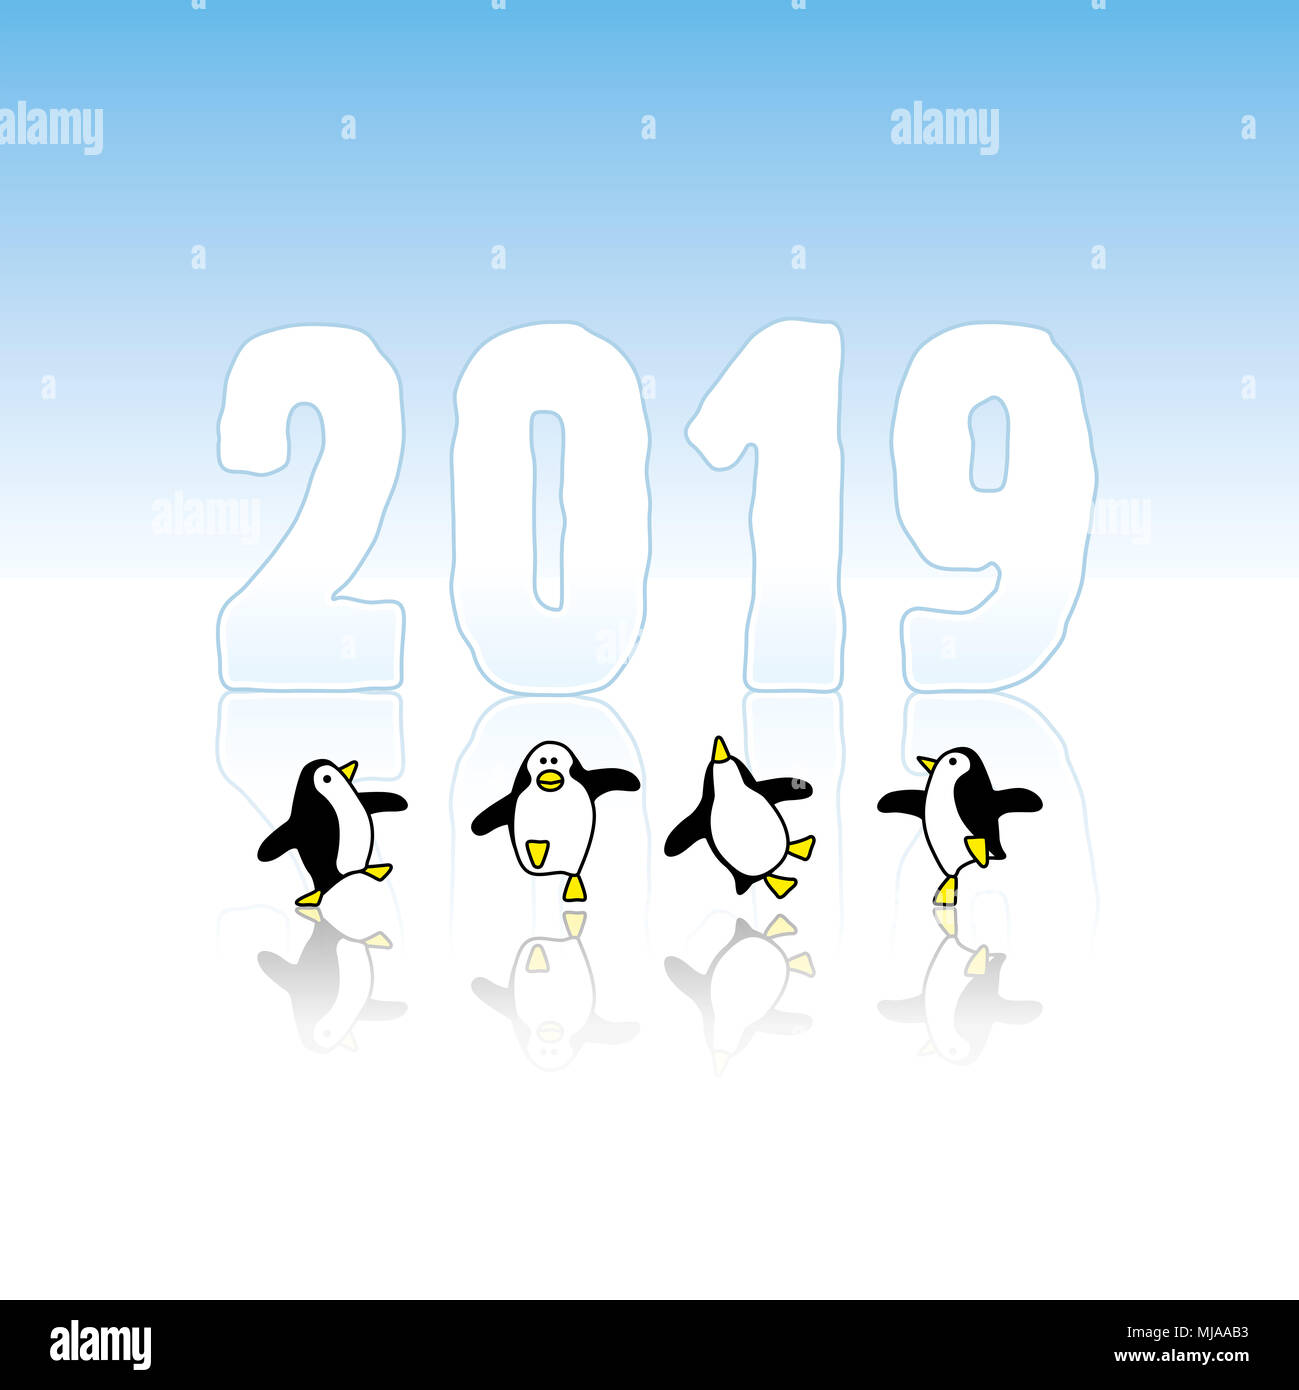 Four Happy Party Penguins Dancing in front of Frozen New Year 2019 made in Ice Stock Photo